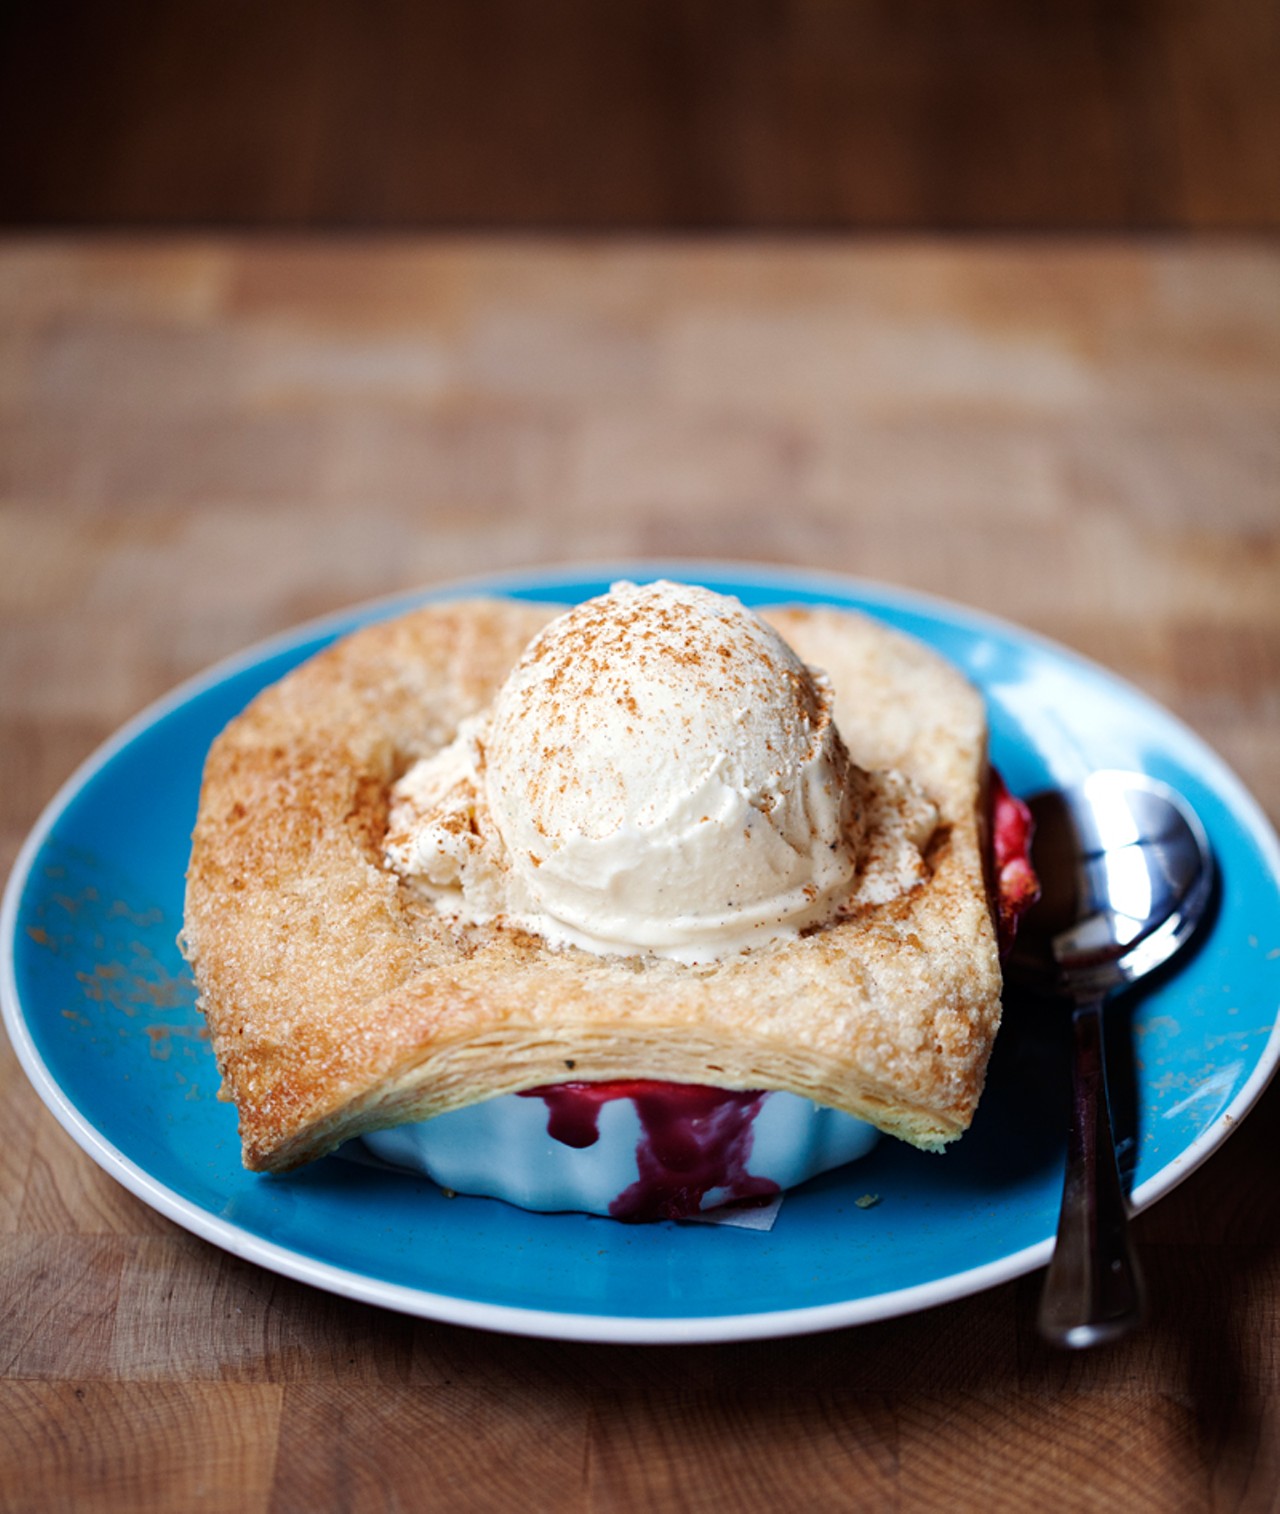 The Old-Fashioned Cherry Pie is made with tart pie cherries, a butter crust and is served with vanilla ice cream.